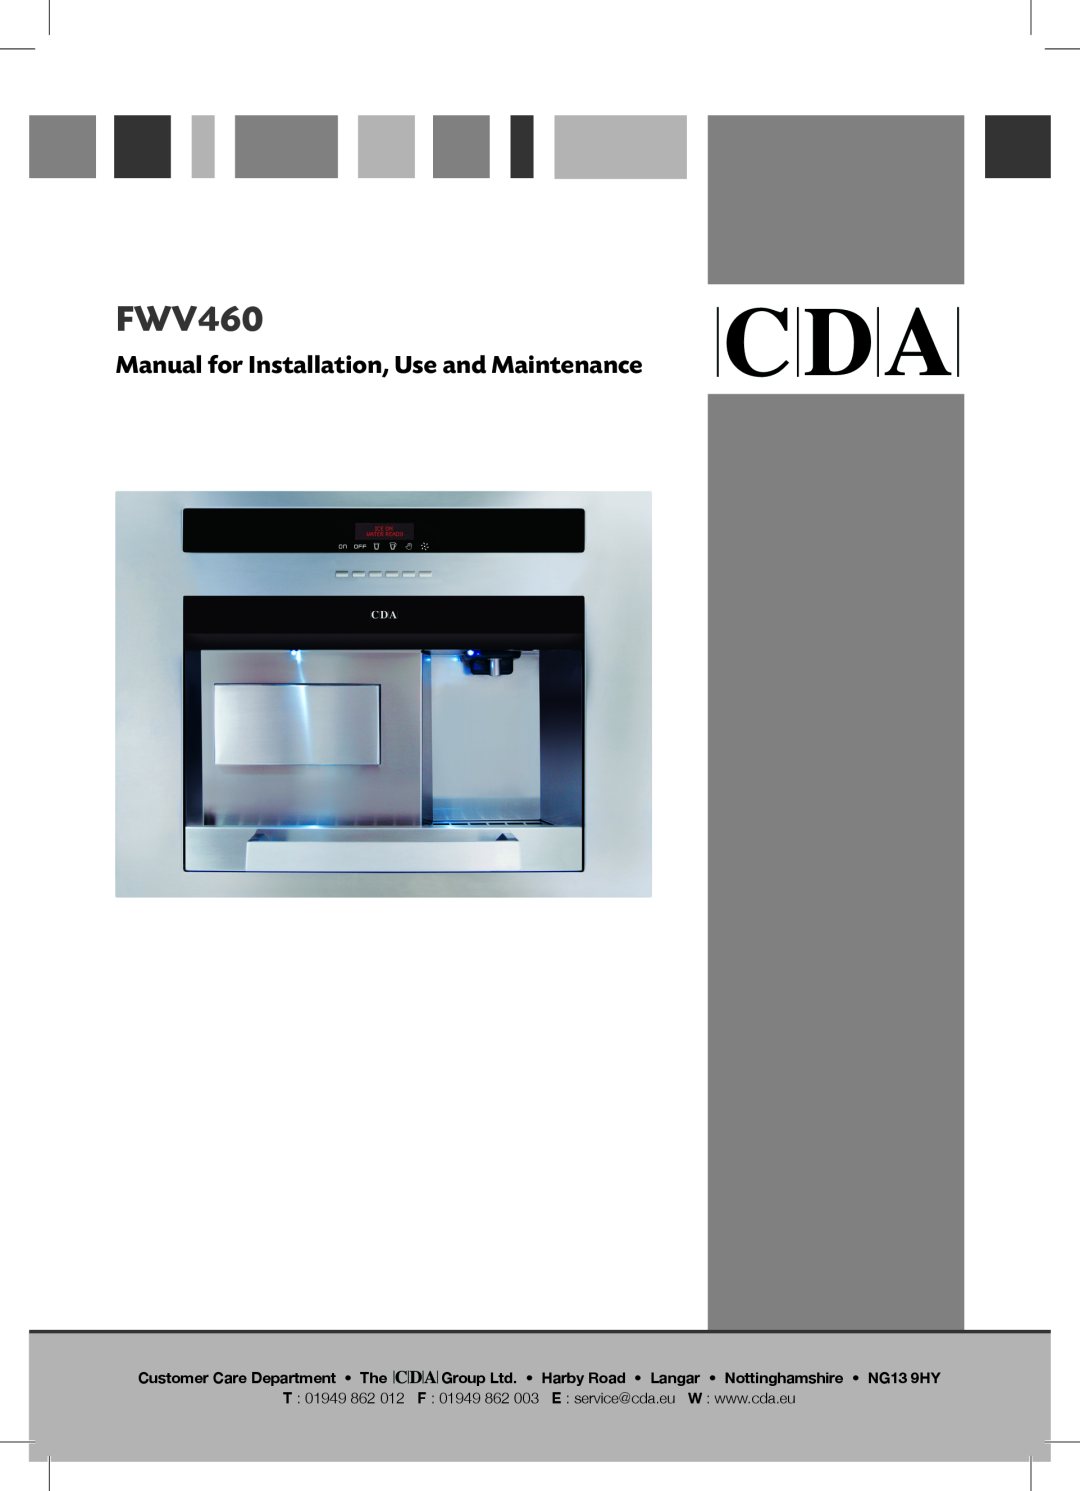 CDA FWV460 manual Manual for Installation, Use and Maintenance, Customer Care Department The 